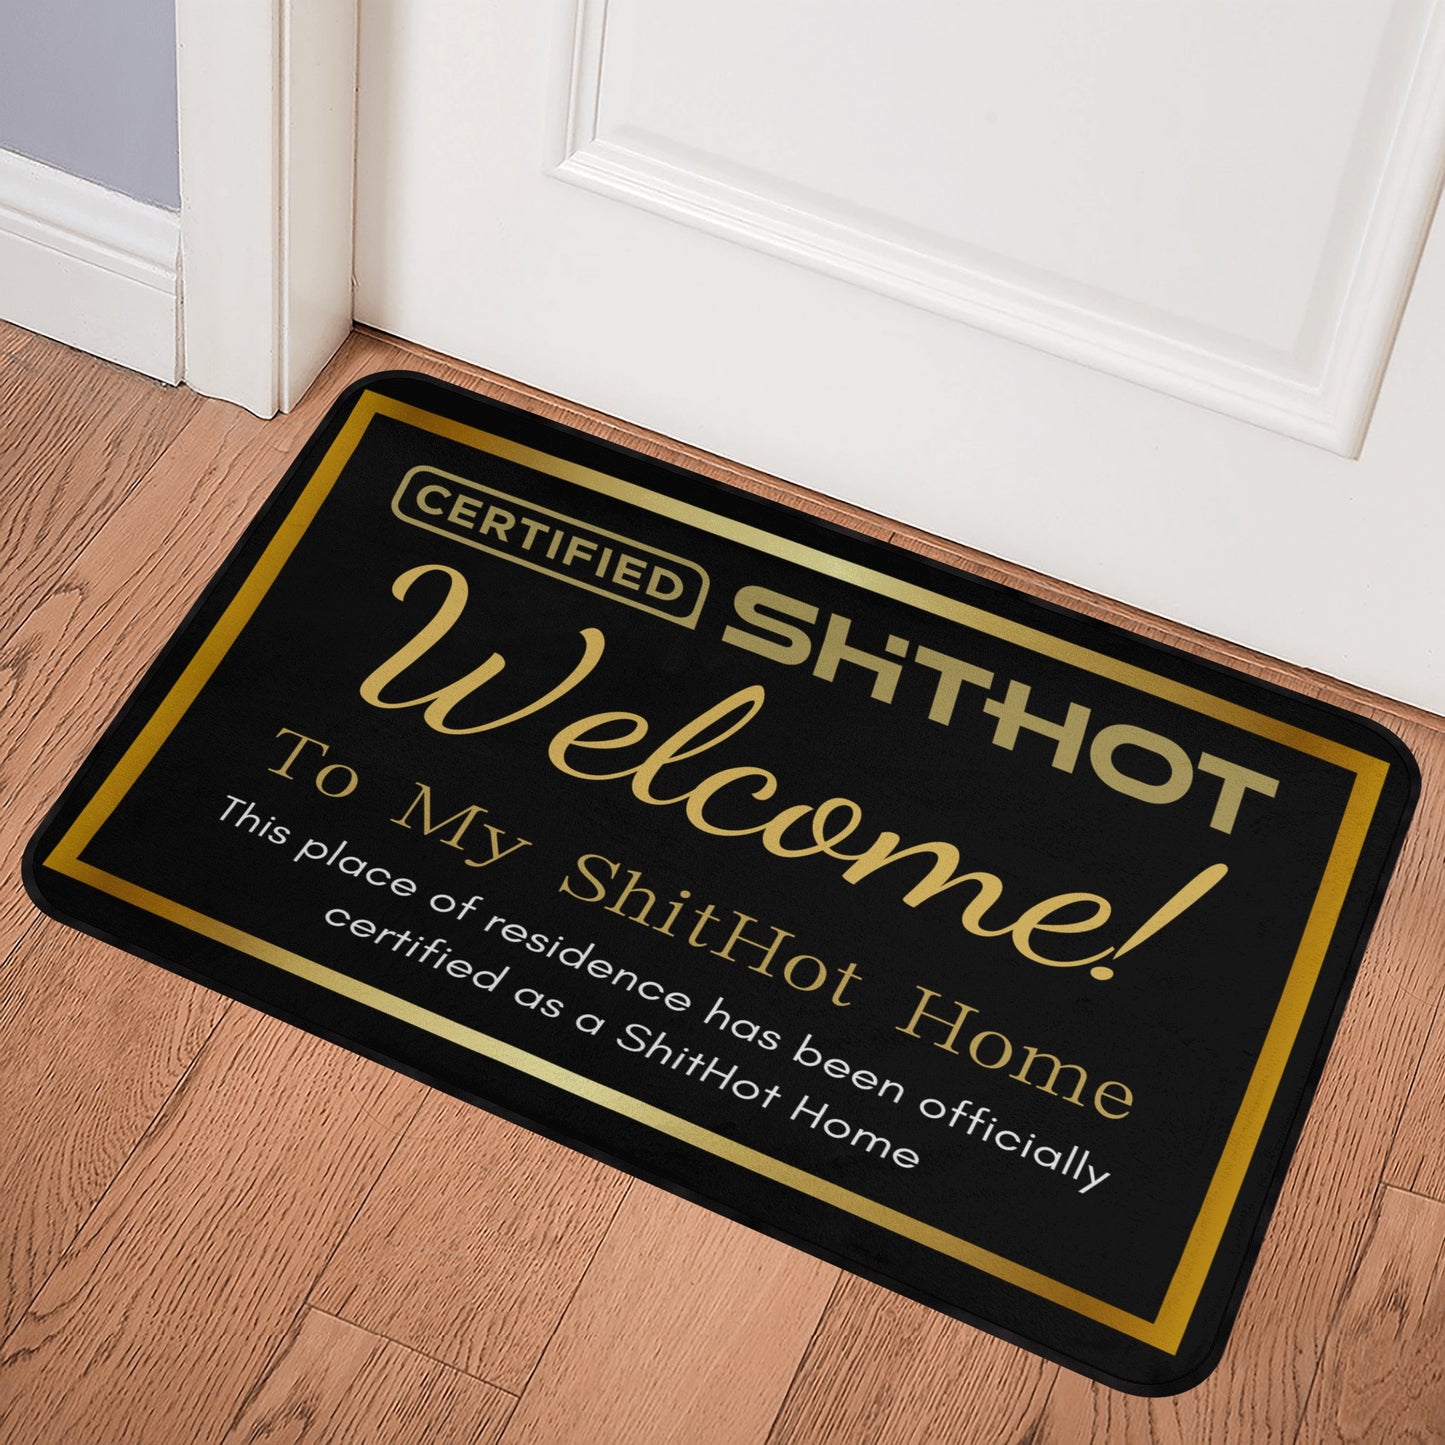 Certified ShitHot Doormat - My Home